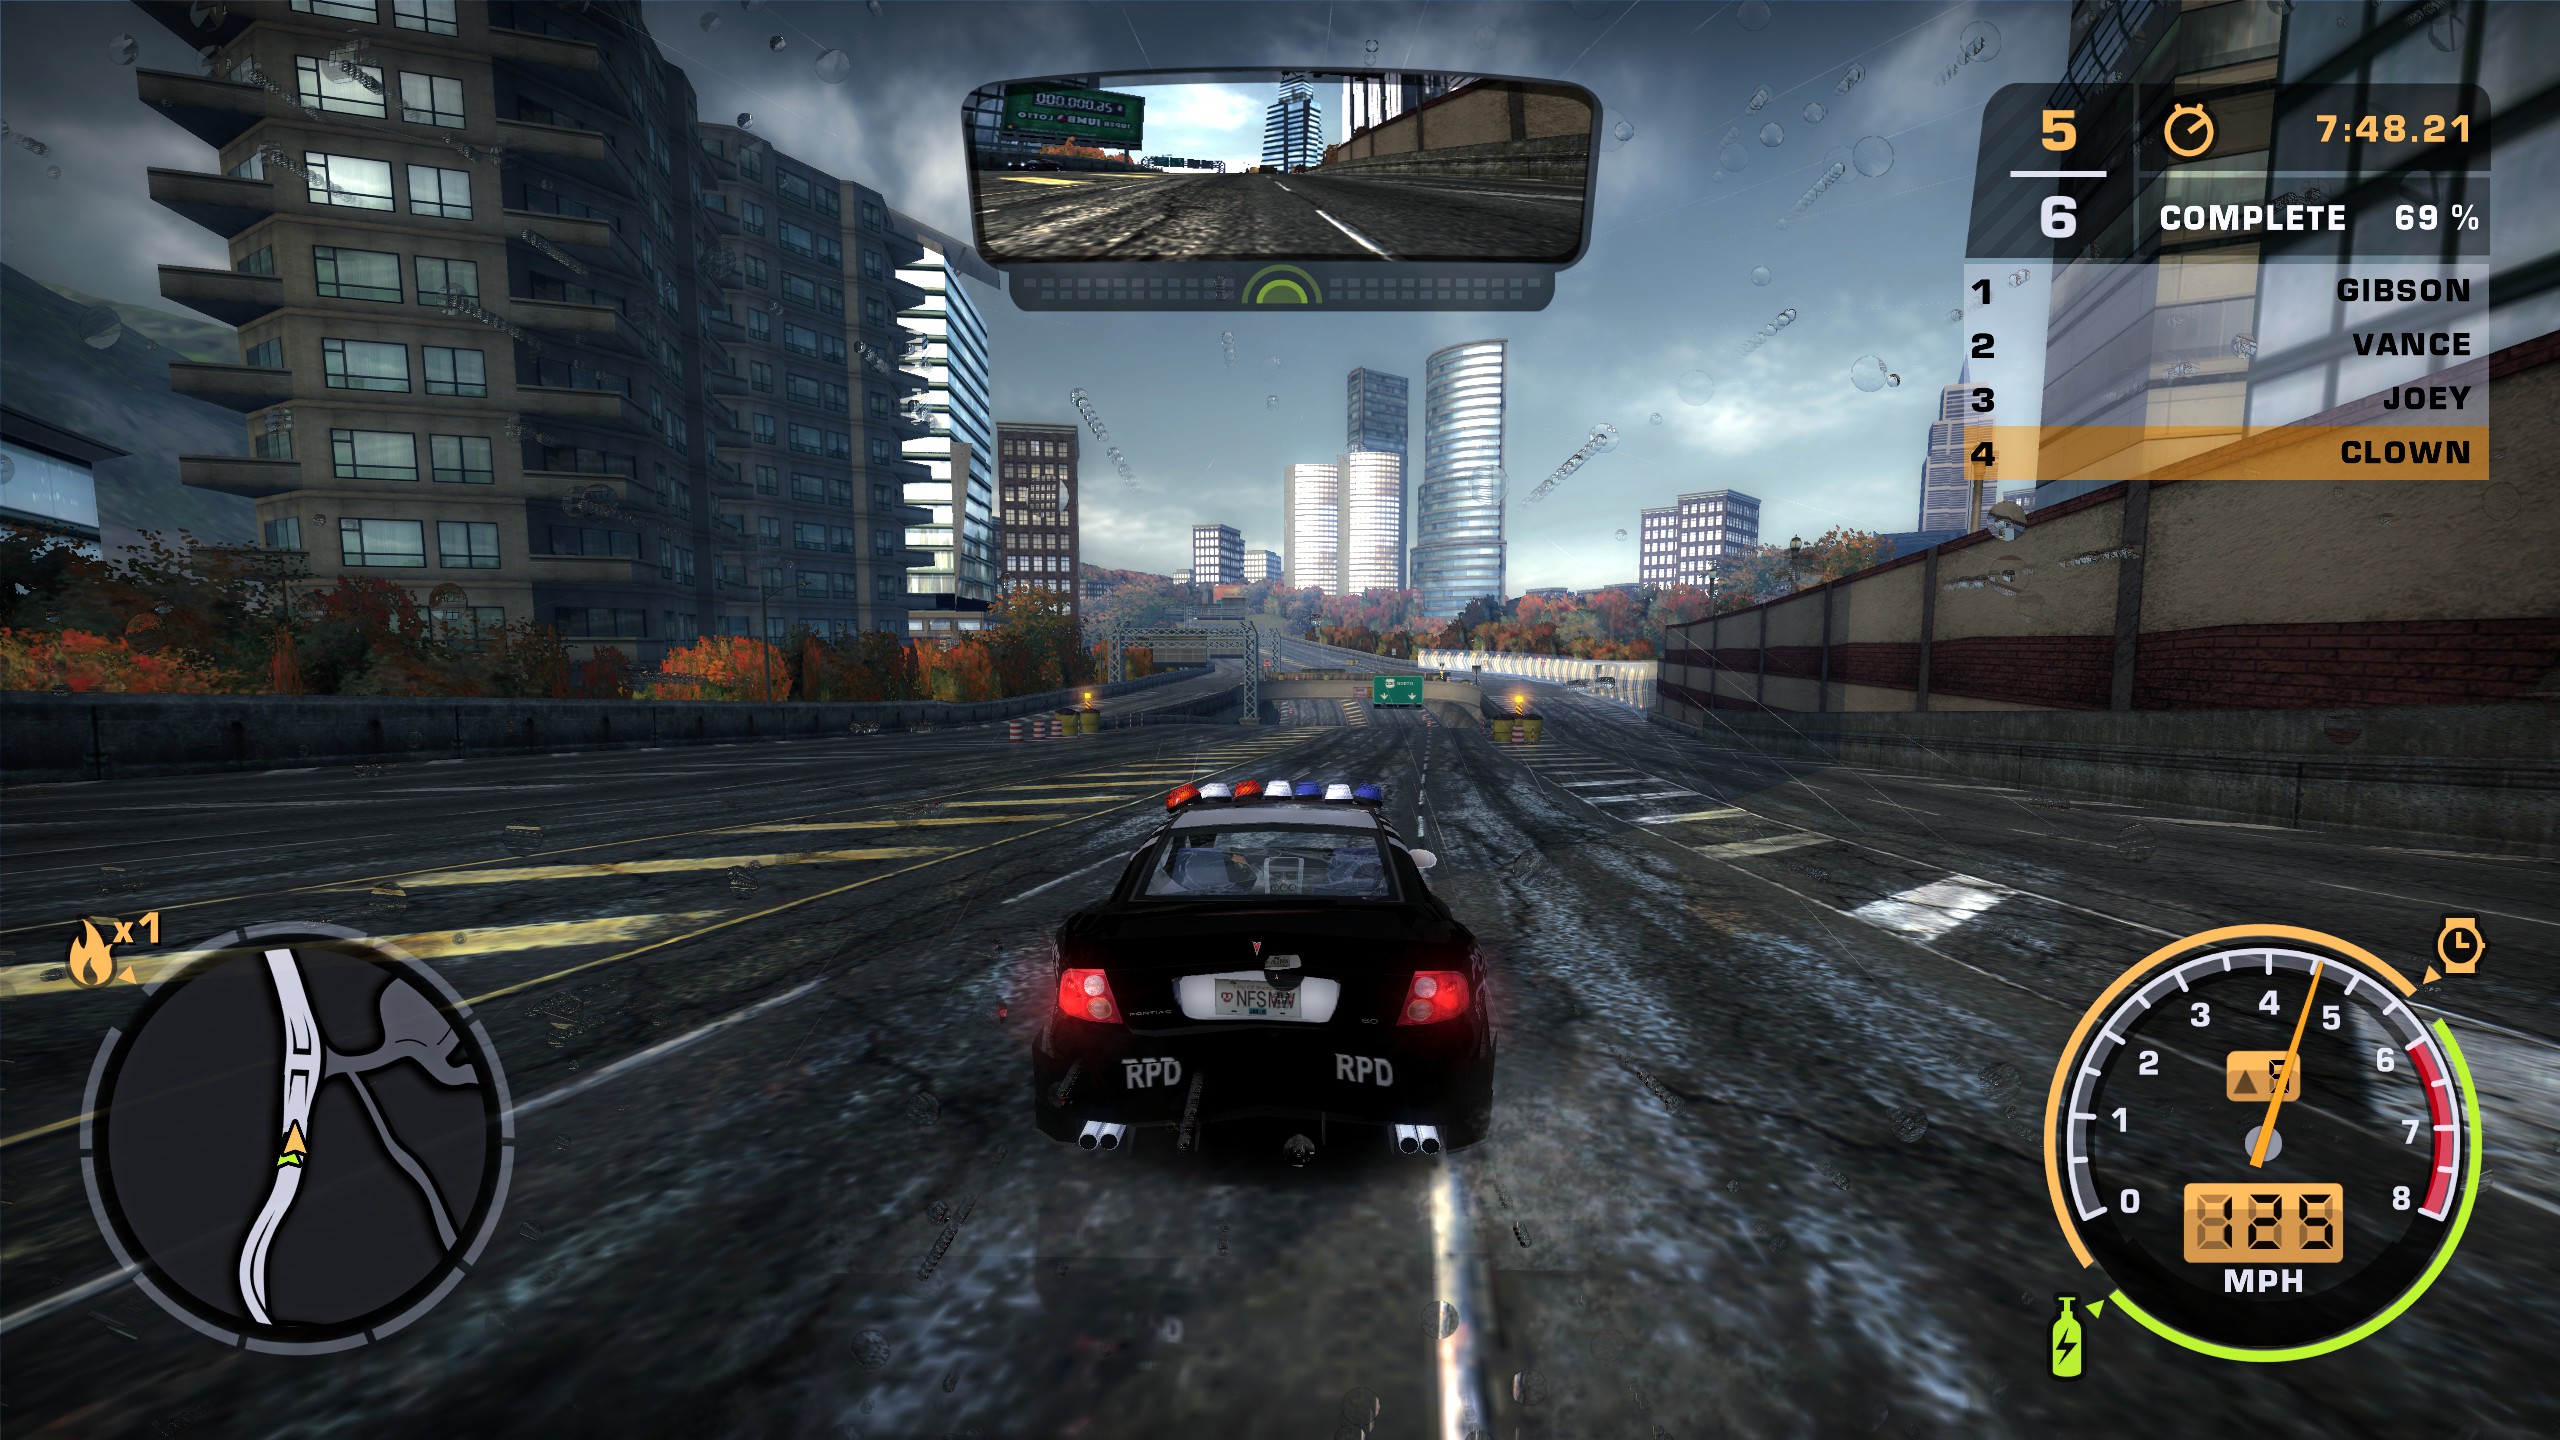 Need For Speed Most Wanted Black Edition PC Game Free Download